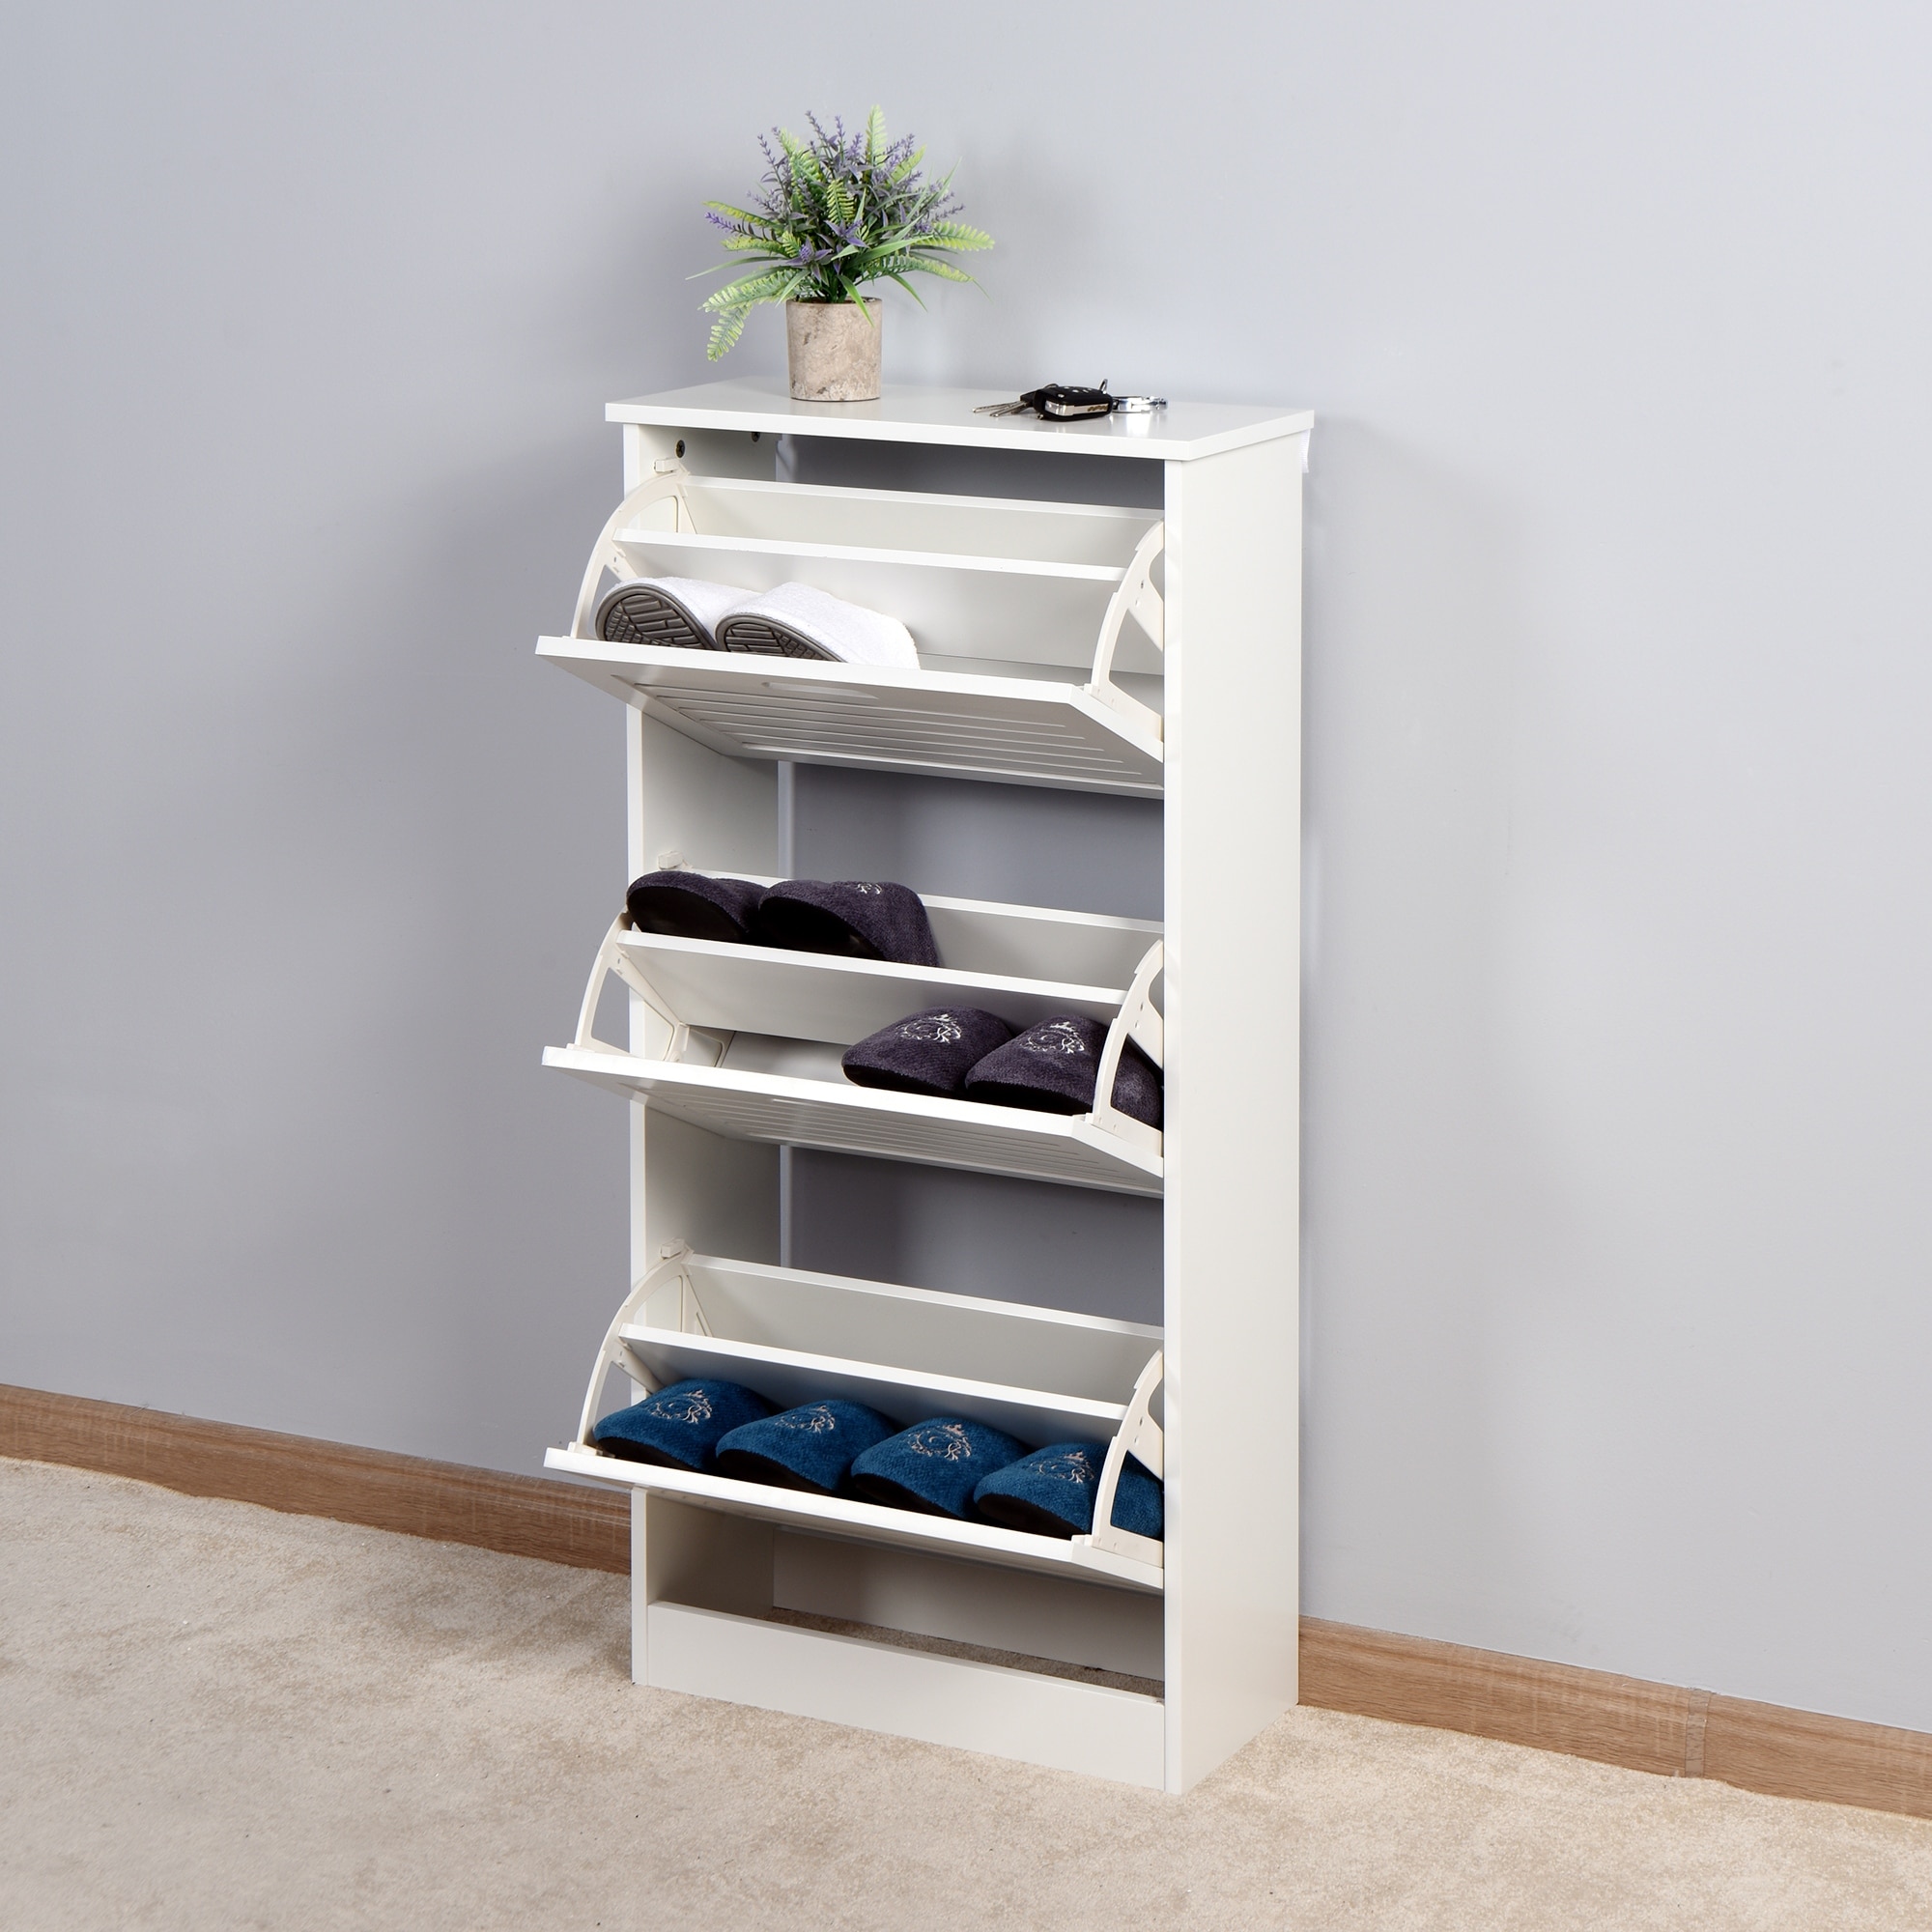 https://ak1.ostkcdn.com/images/products/is/images/direct/317c0b4a584036b02123ea8a55859b6d9196d917/White-Wooden-Shoe-Cabinet-with-3-Flip-Doors.jpg